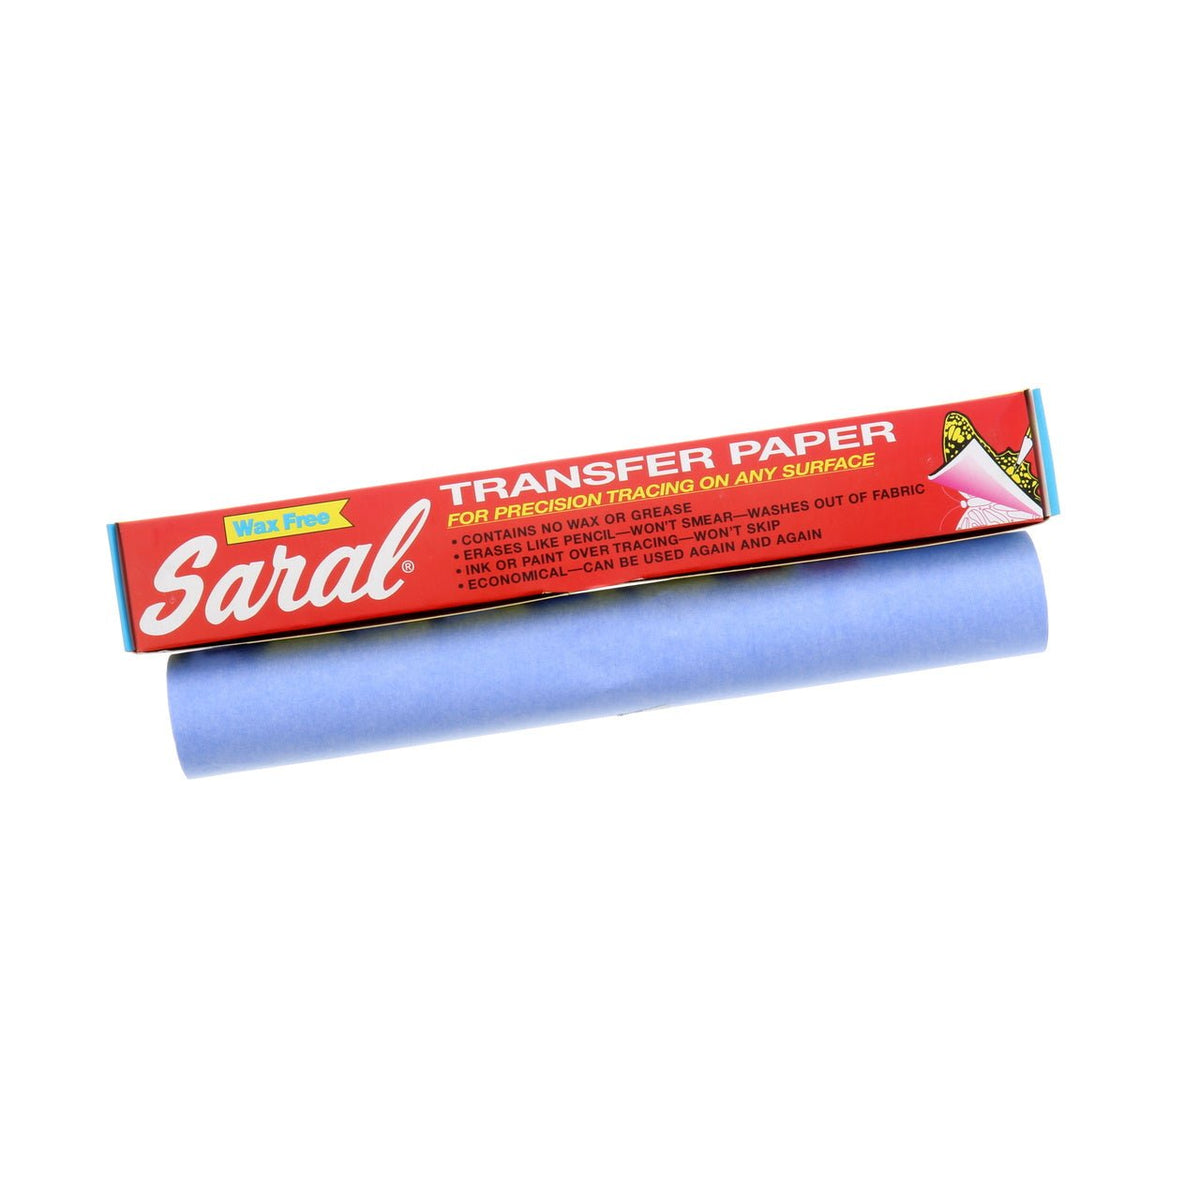 Saral Transfer Paper - 12 inch by 12 ft roll - Non-photo Blue - merriartist.com